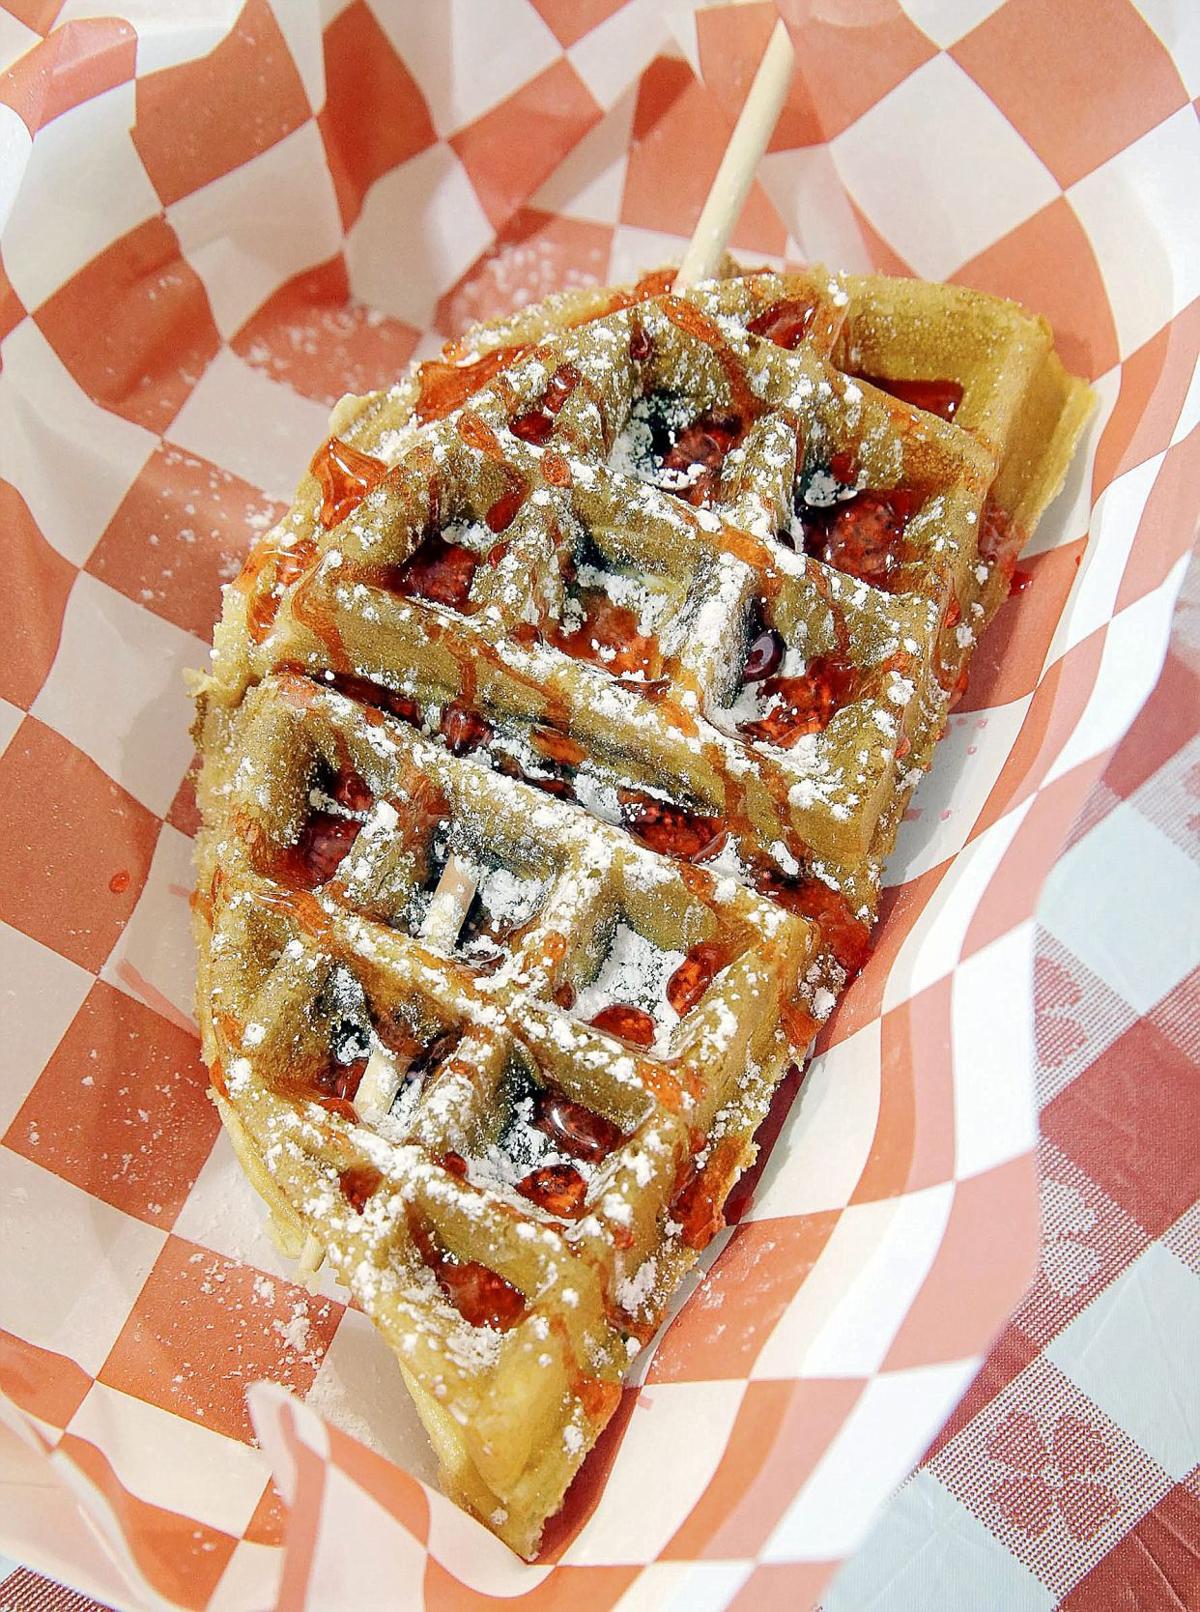 The newest foods at the Tulsa State Fair | Weekend magazine cover story | www.semadata.org